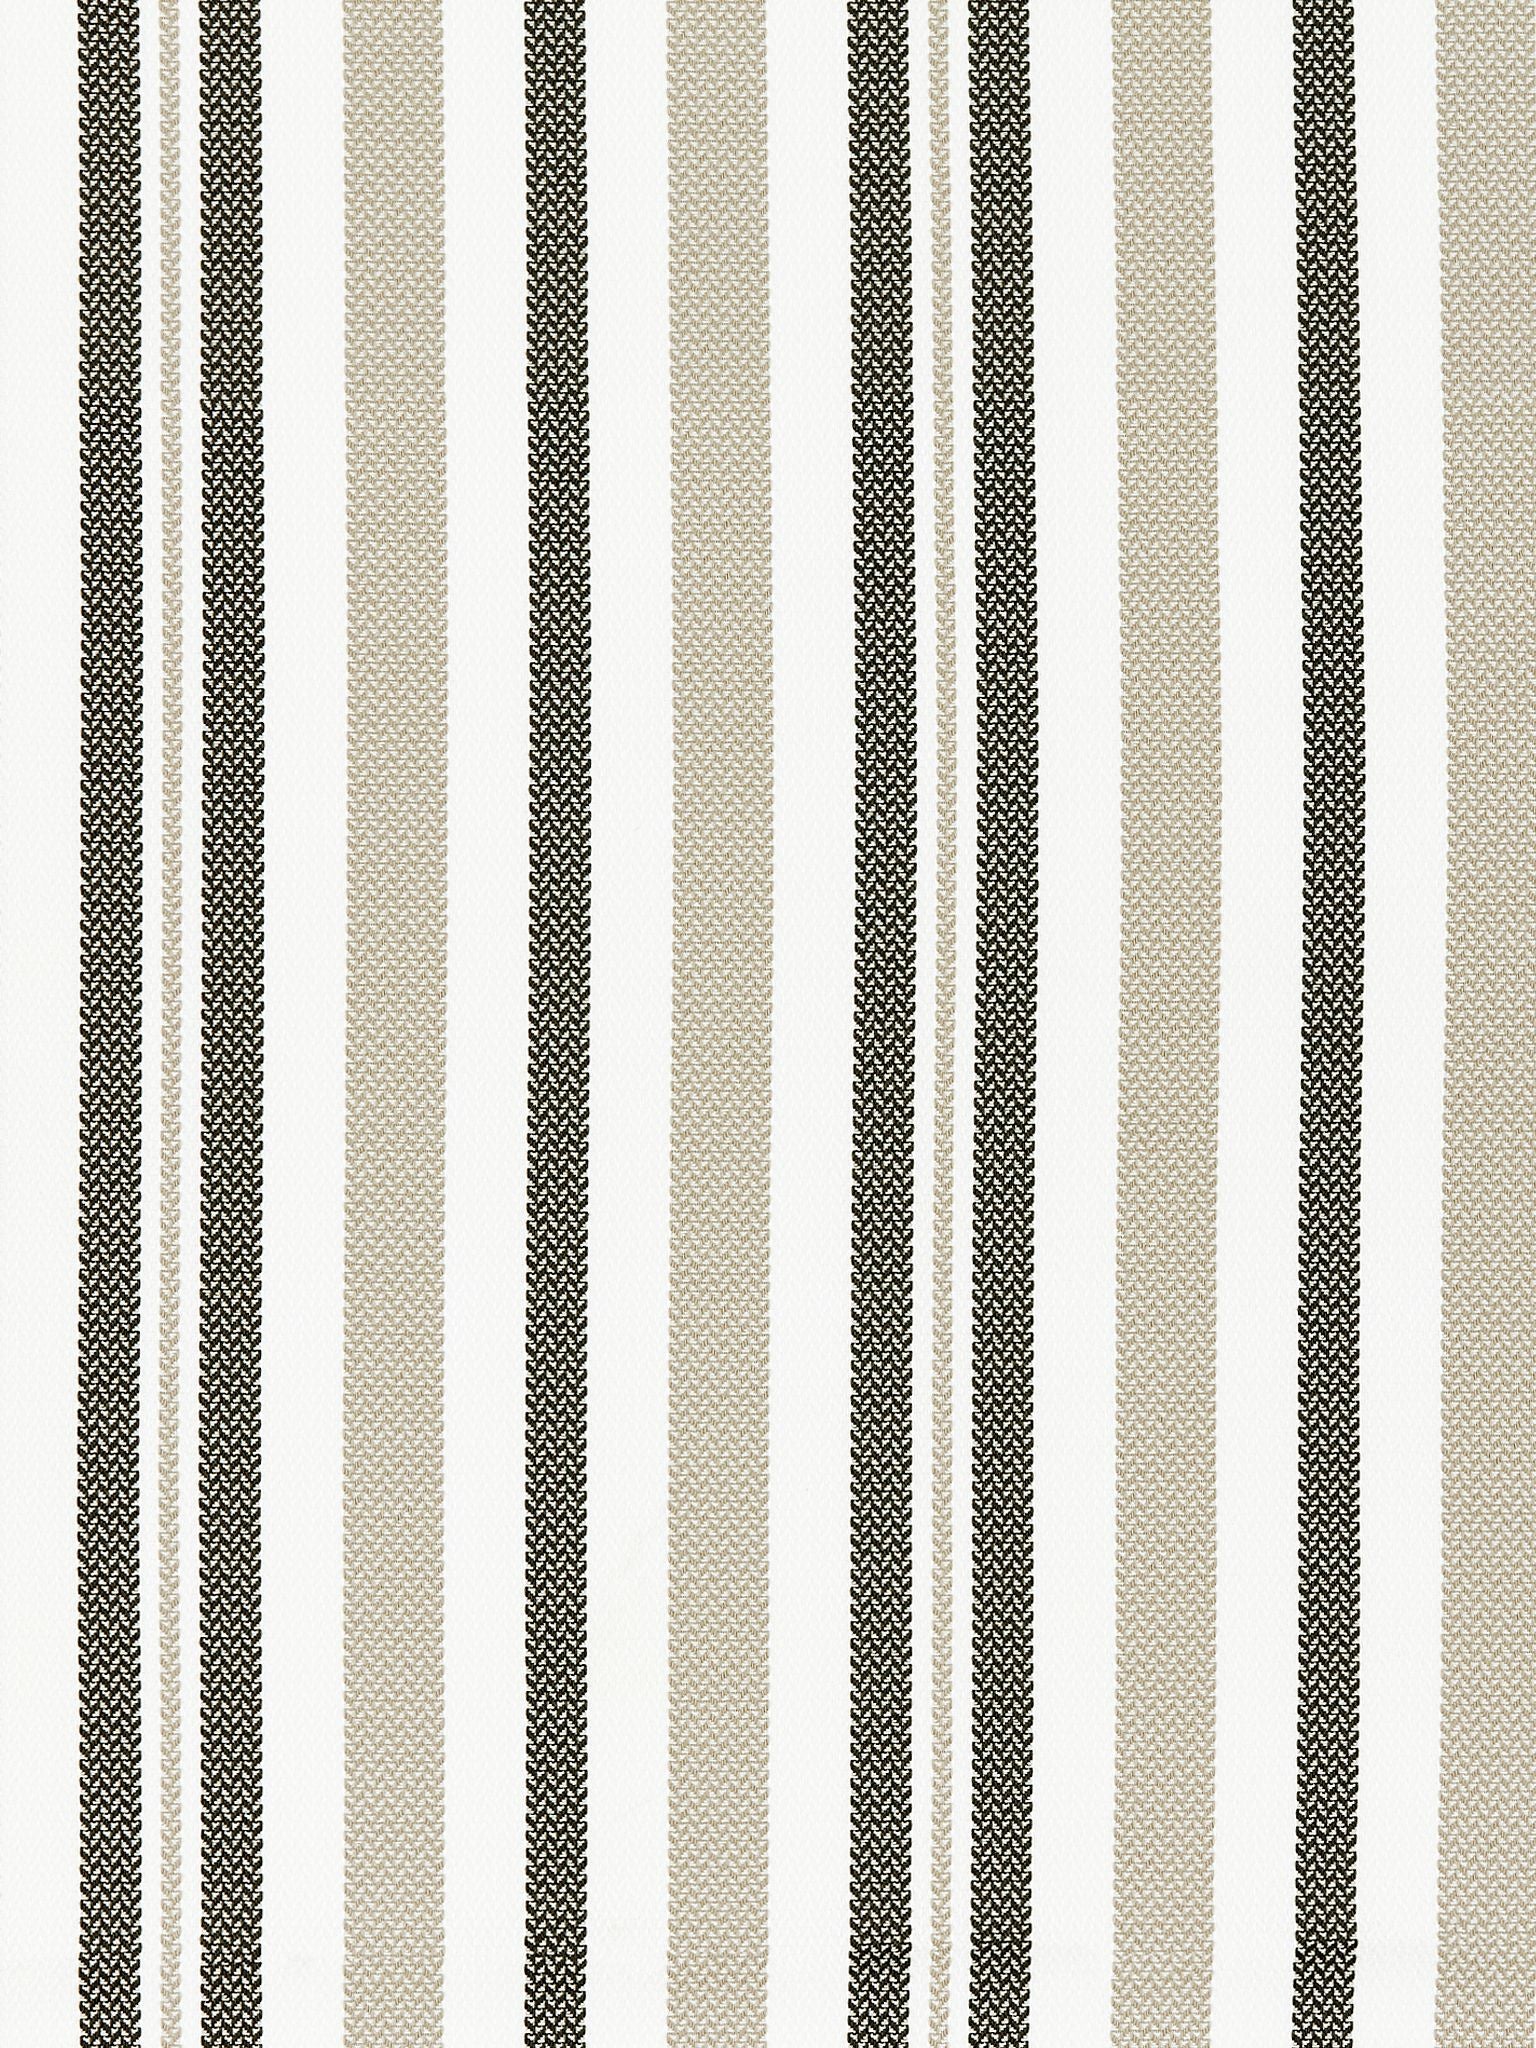 Santorini Stripe fabric in smoke color - pattern number SC 000327188 - by Scalamandre in the Scalamandre Fabrics Book 1 collection